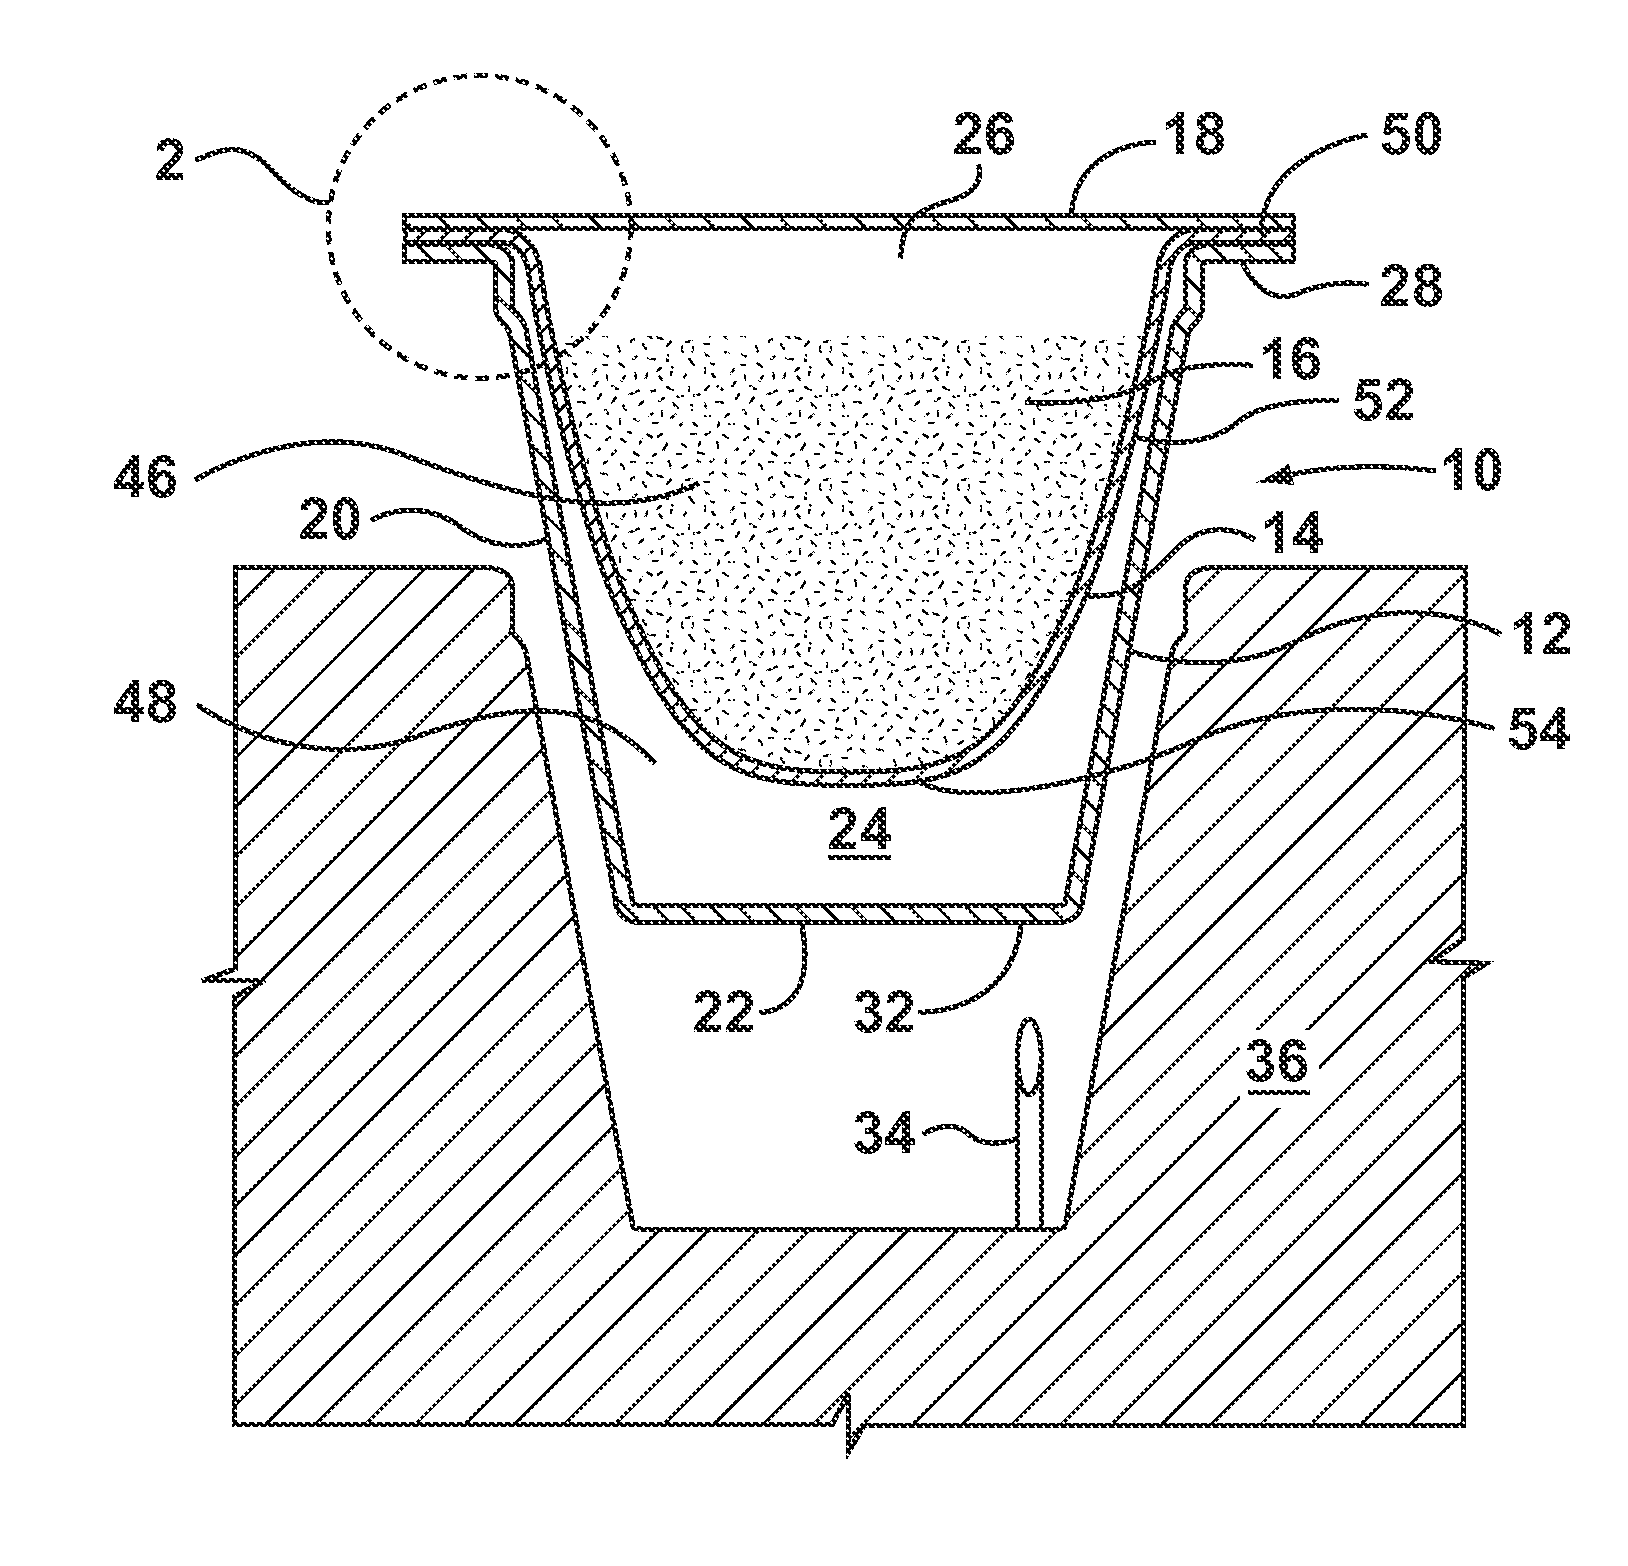 Single serve capsule for improved extraction efficiency and favor retention